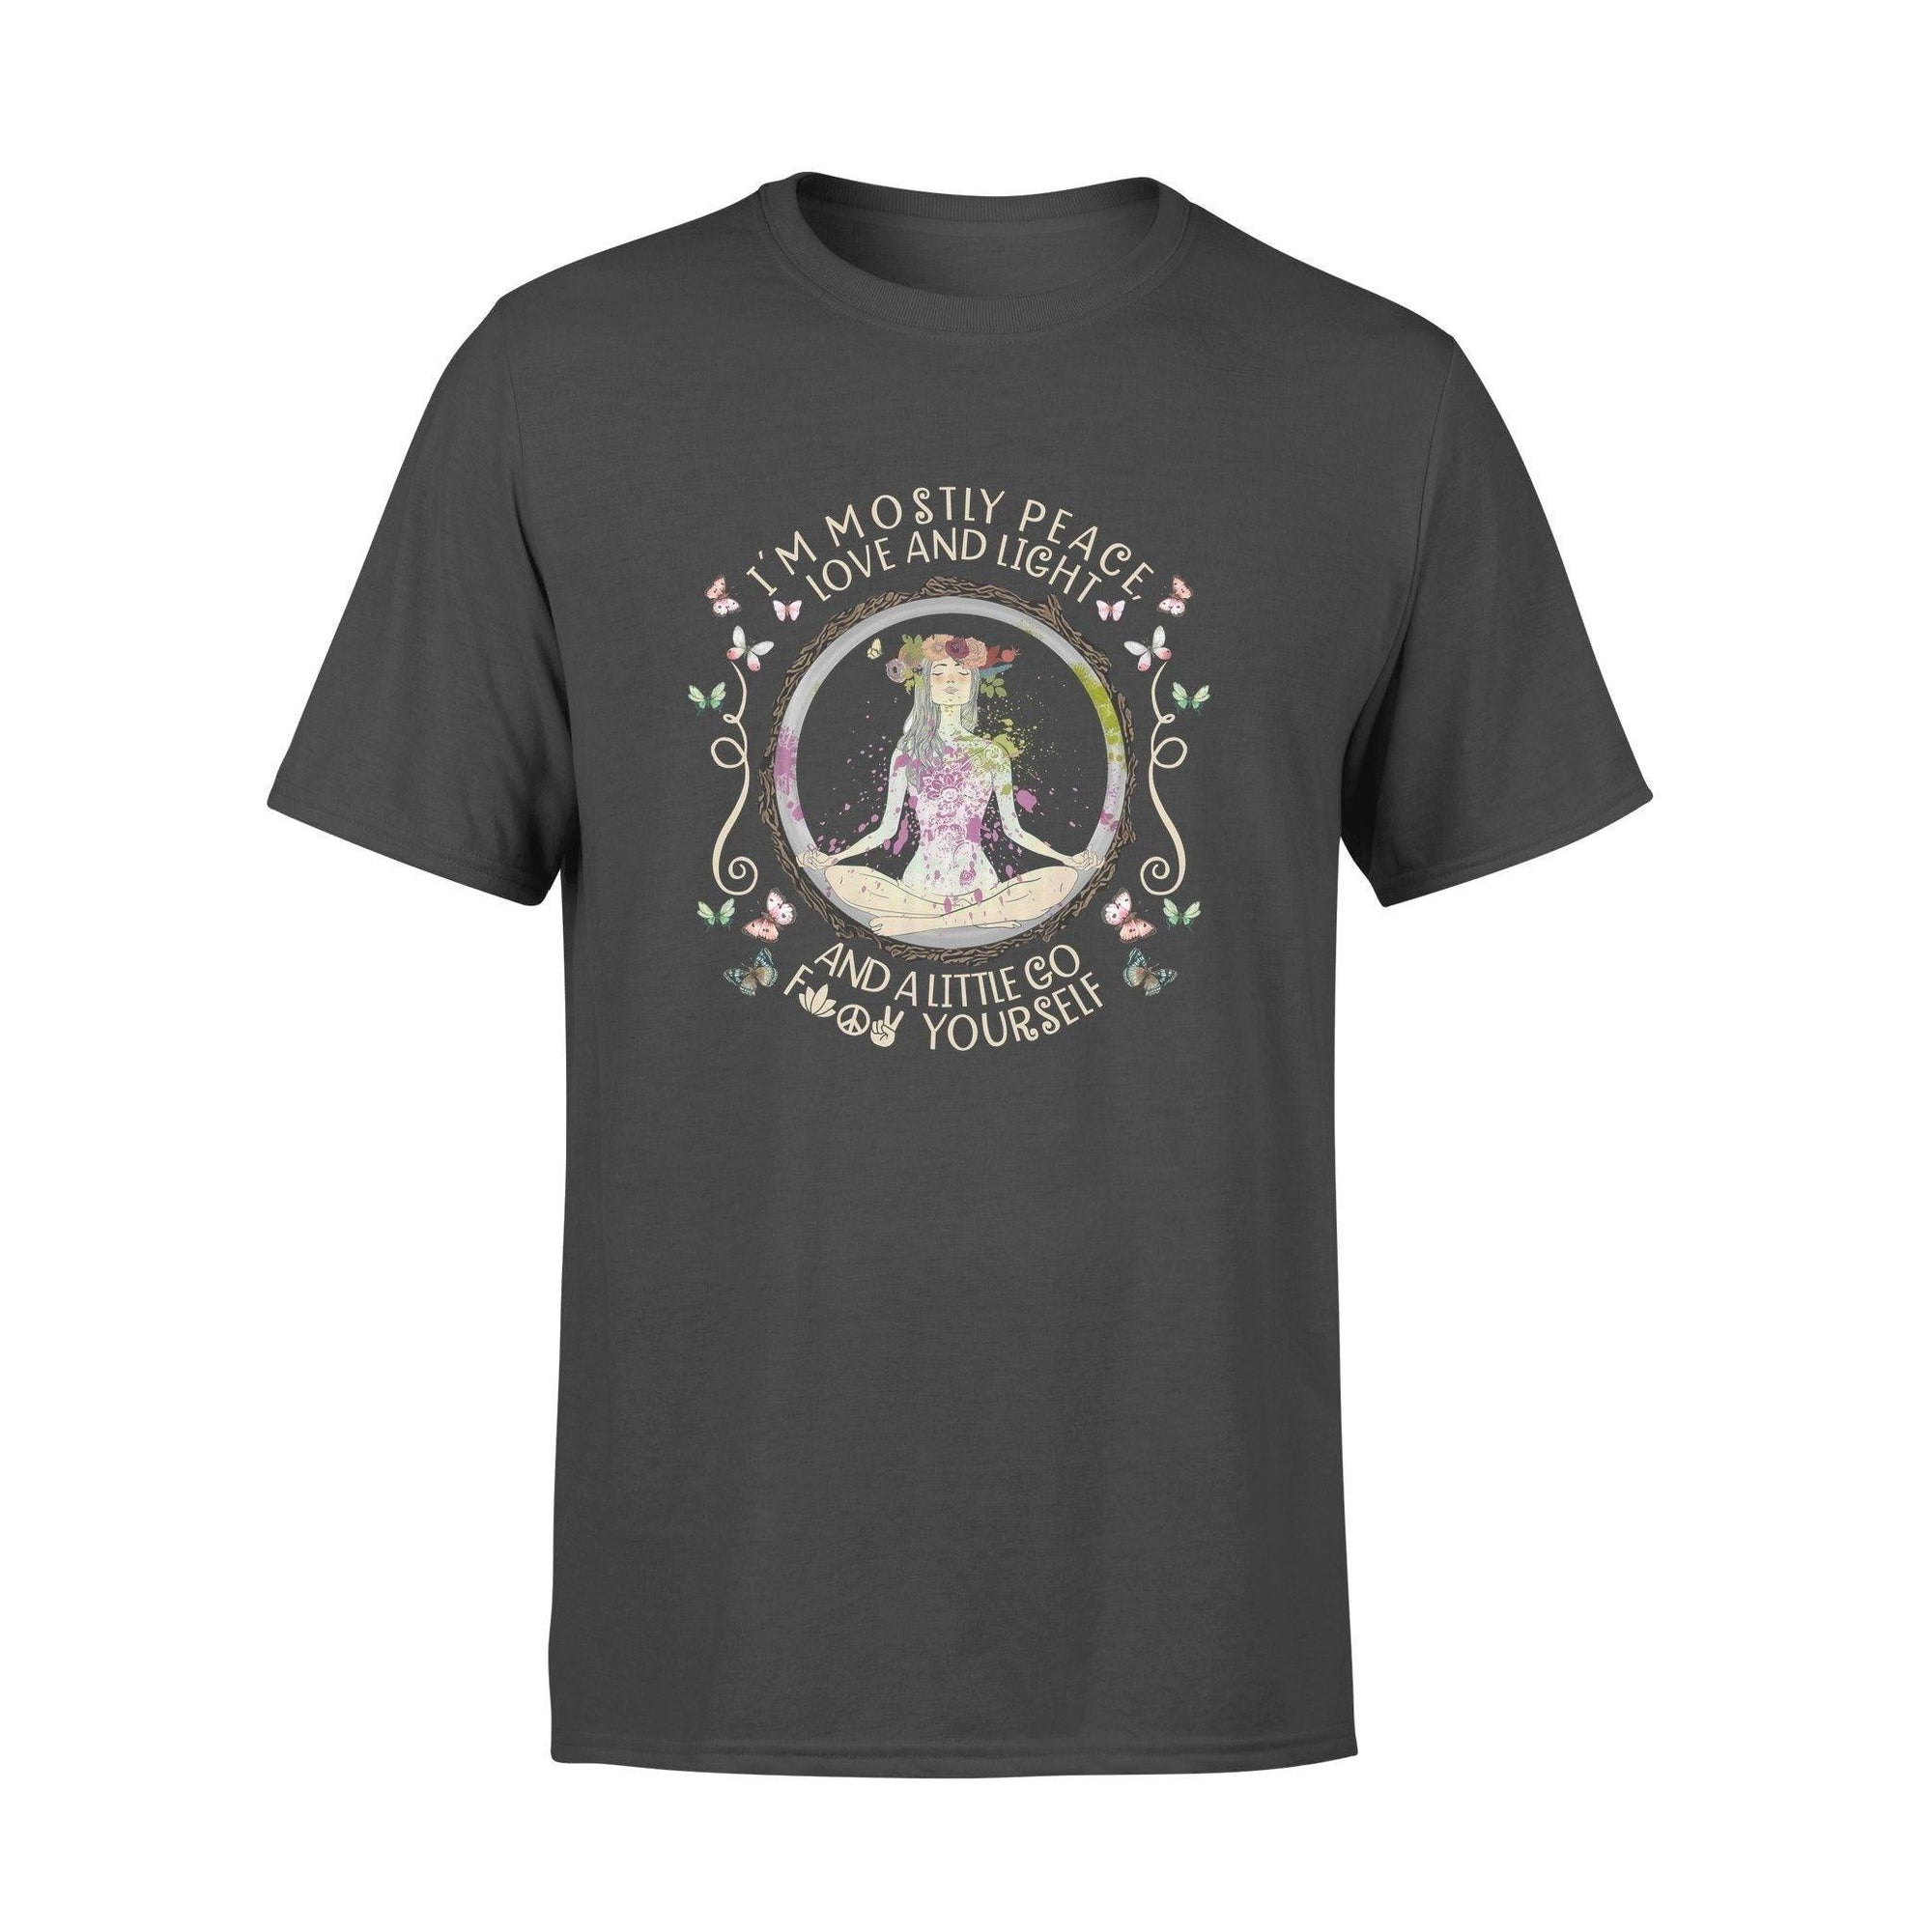 Yoga I'm mostly peace love and light - Standard T-shirt - PERSONAL84